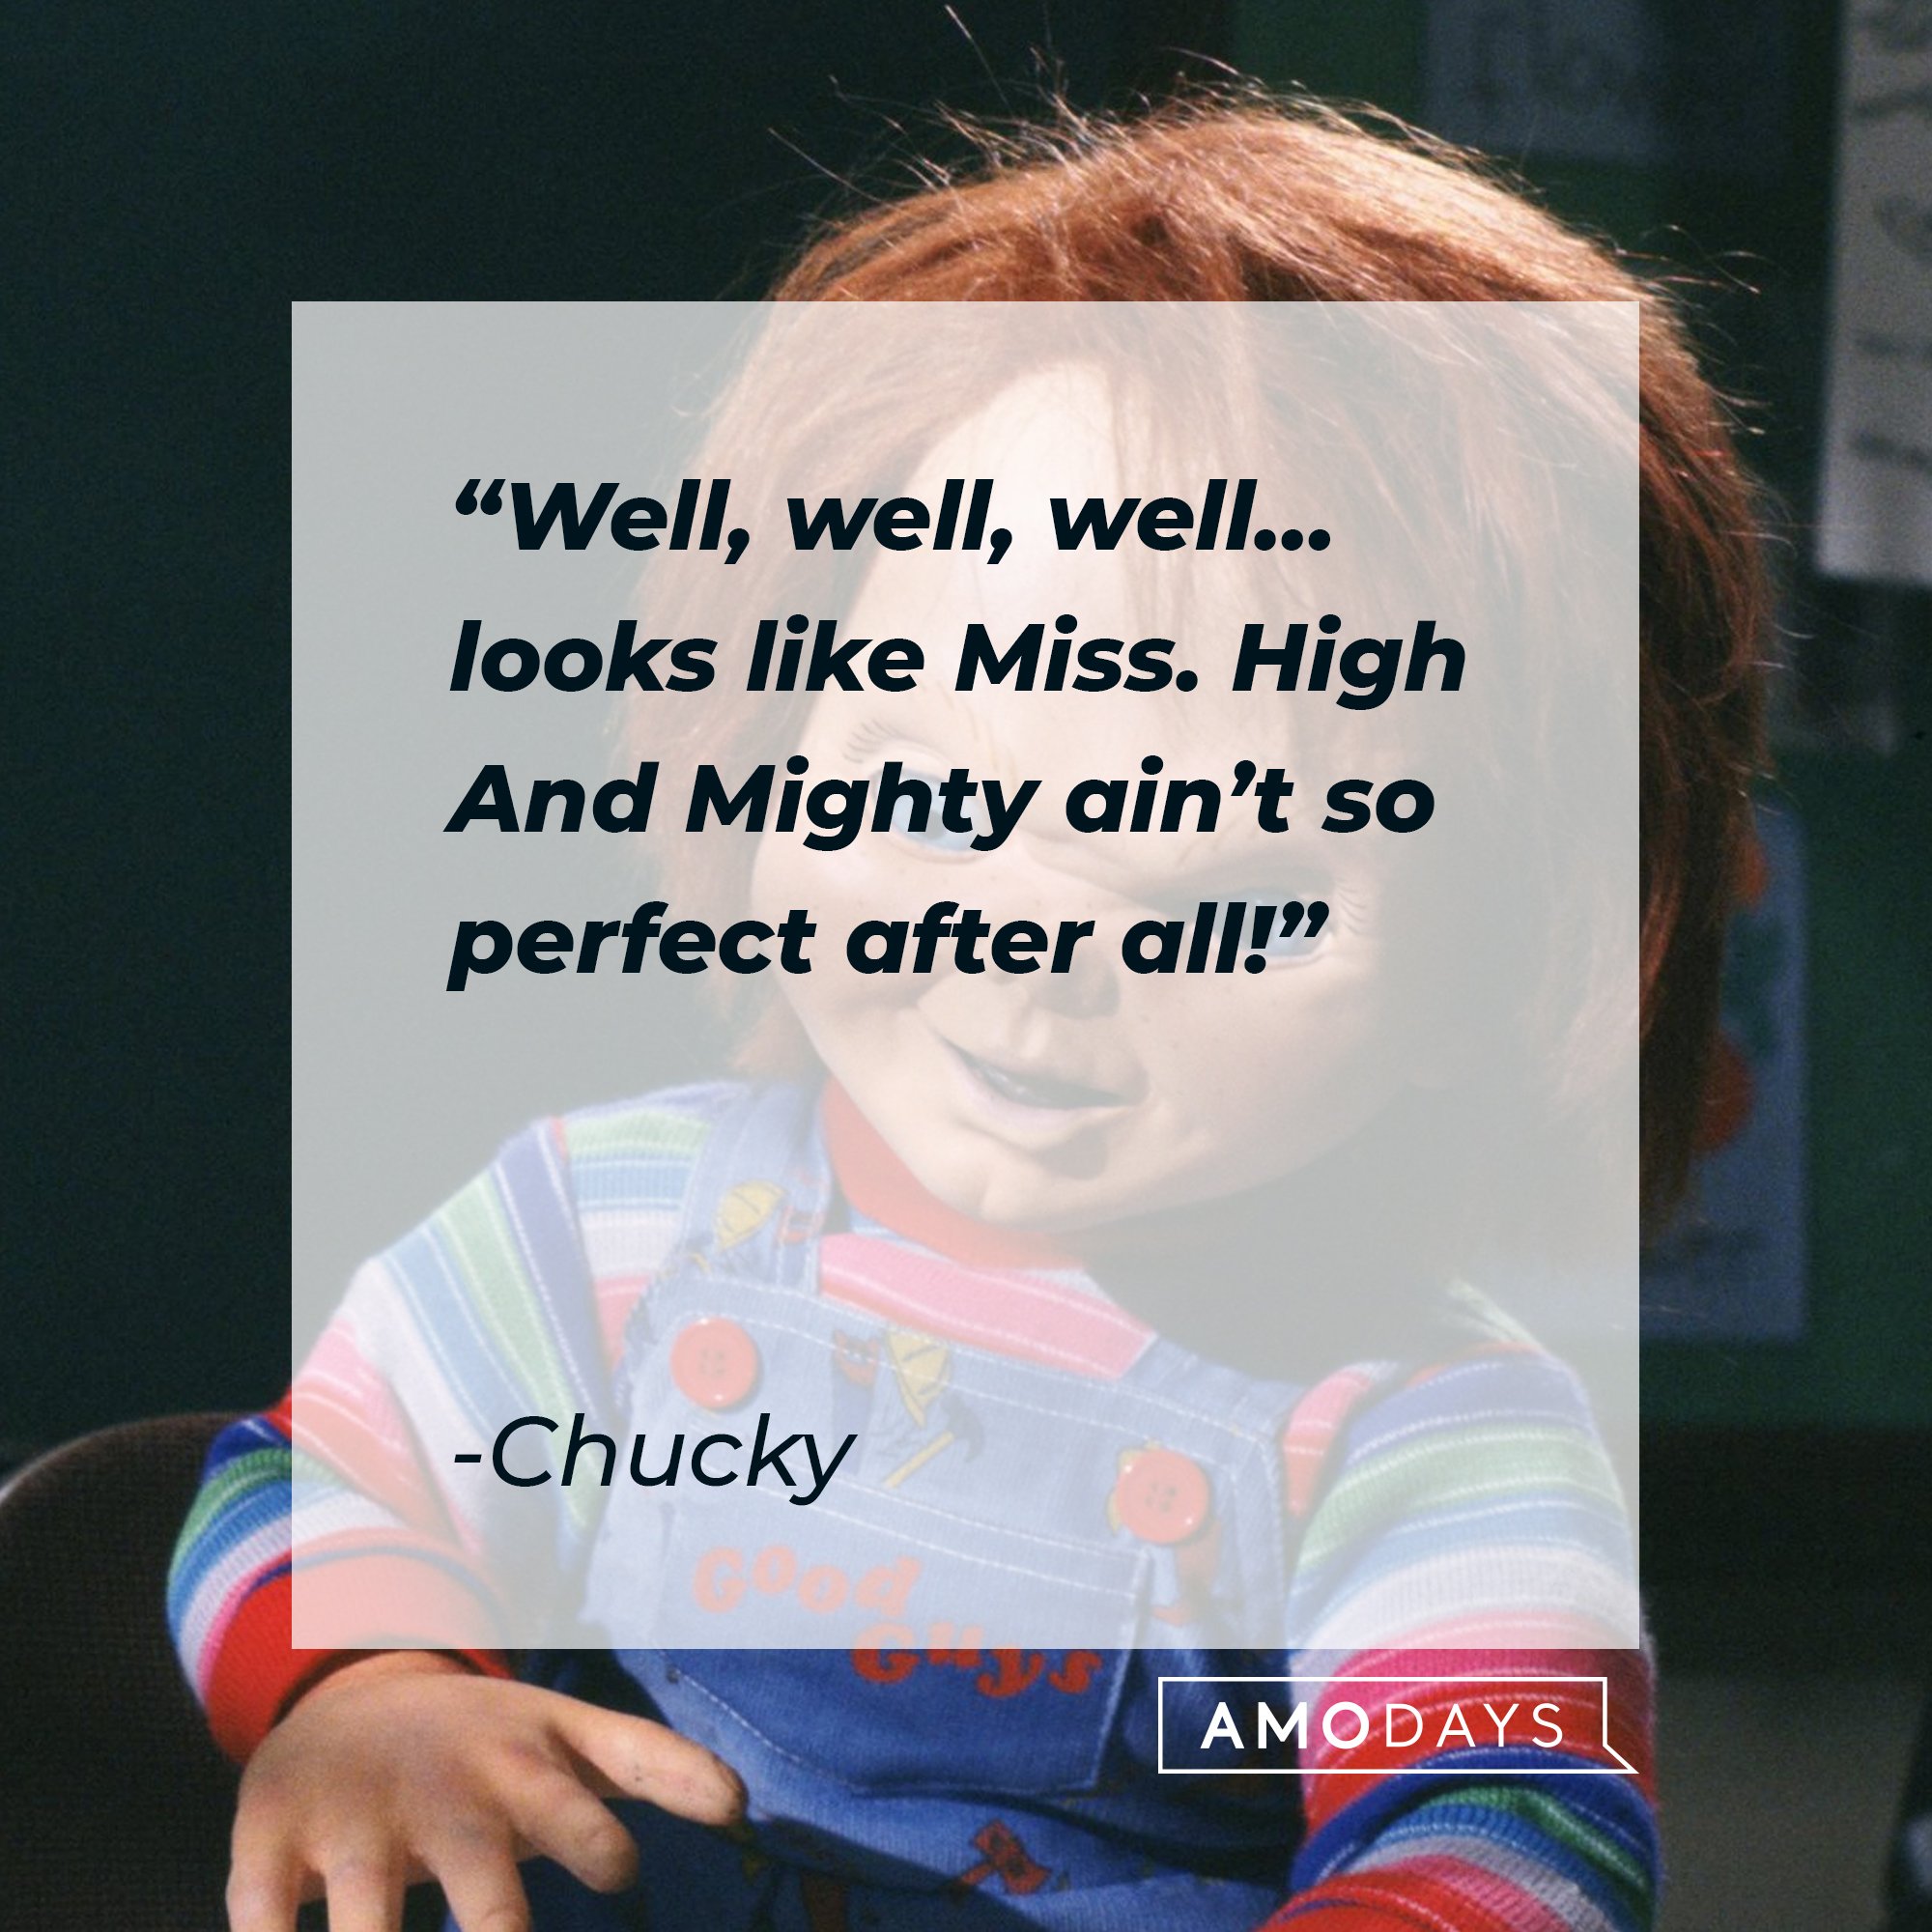 Chucky's quote: "Well, well, well… looks like Miss. High And Mighty ain't so perfect after all!" | Image: AmoDays